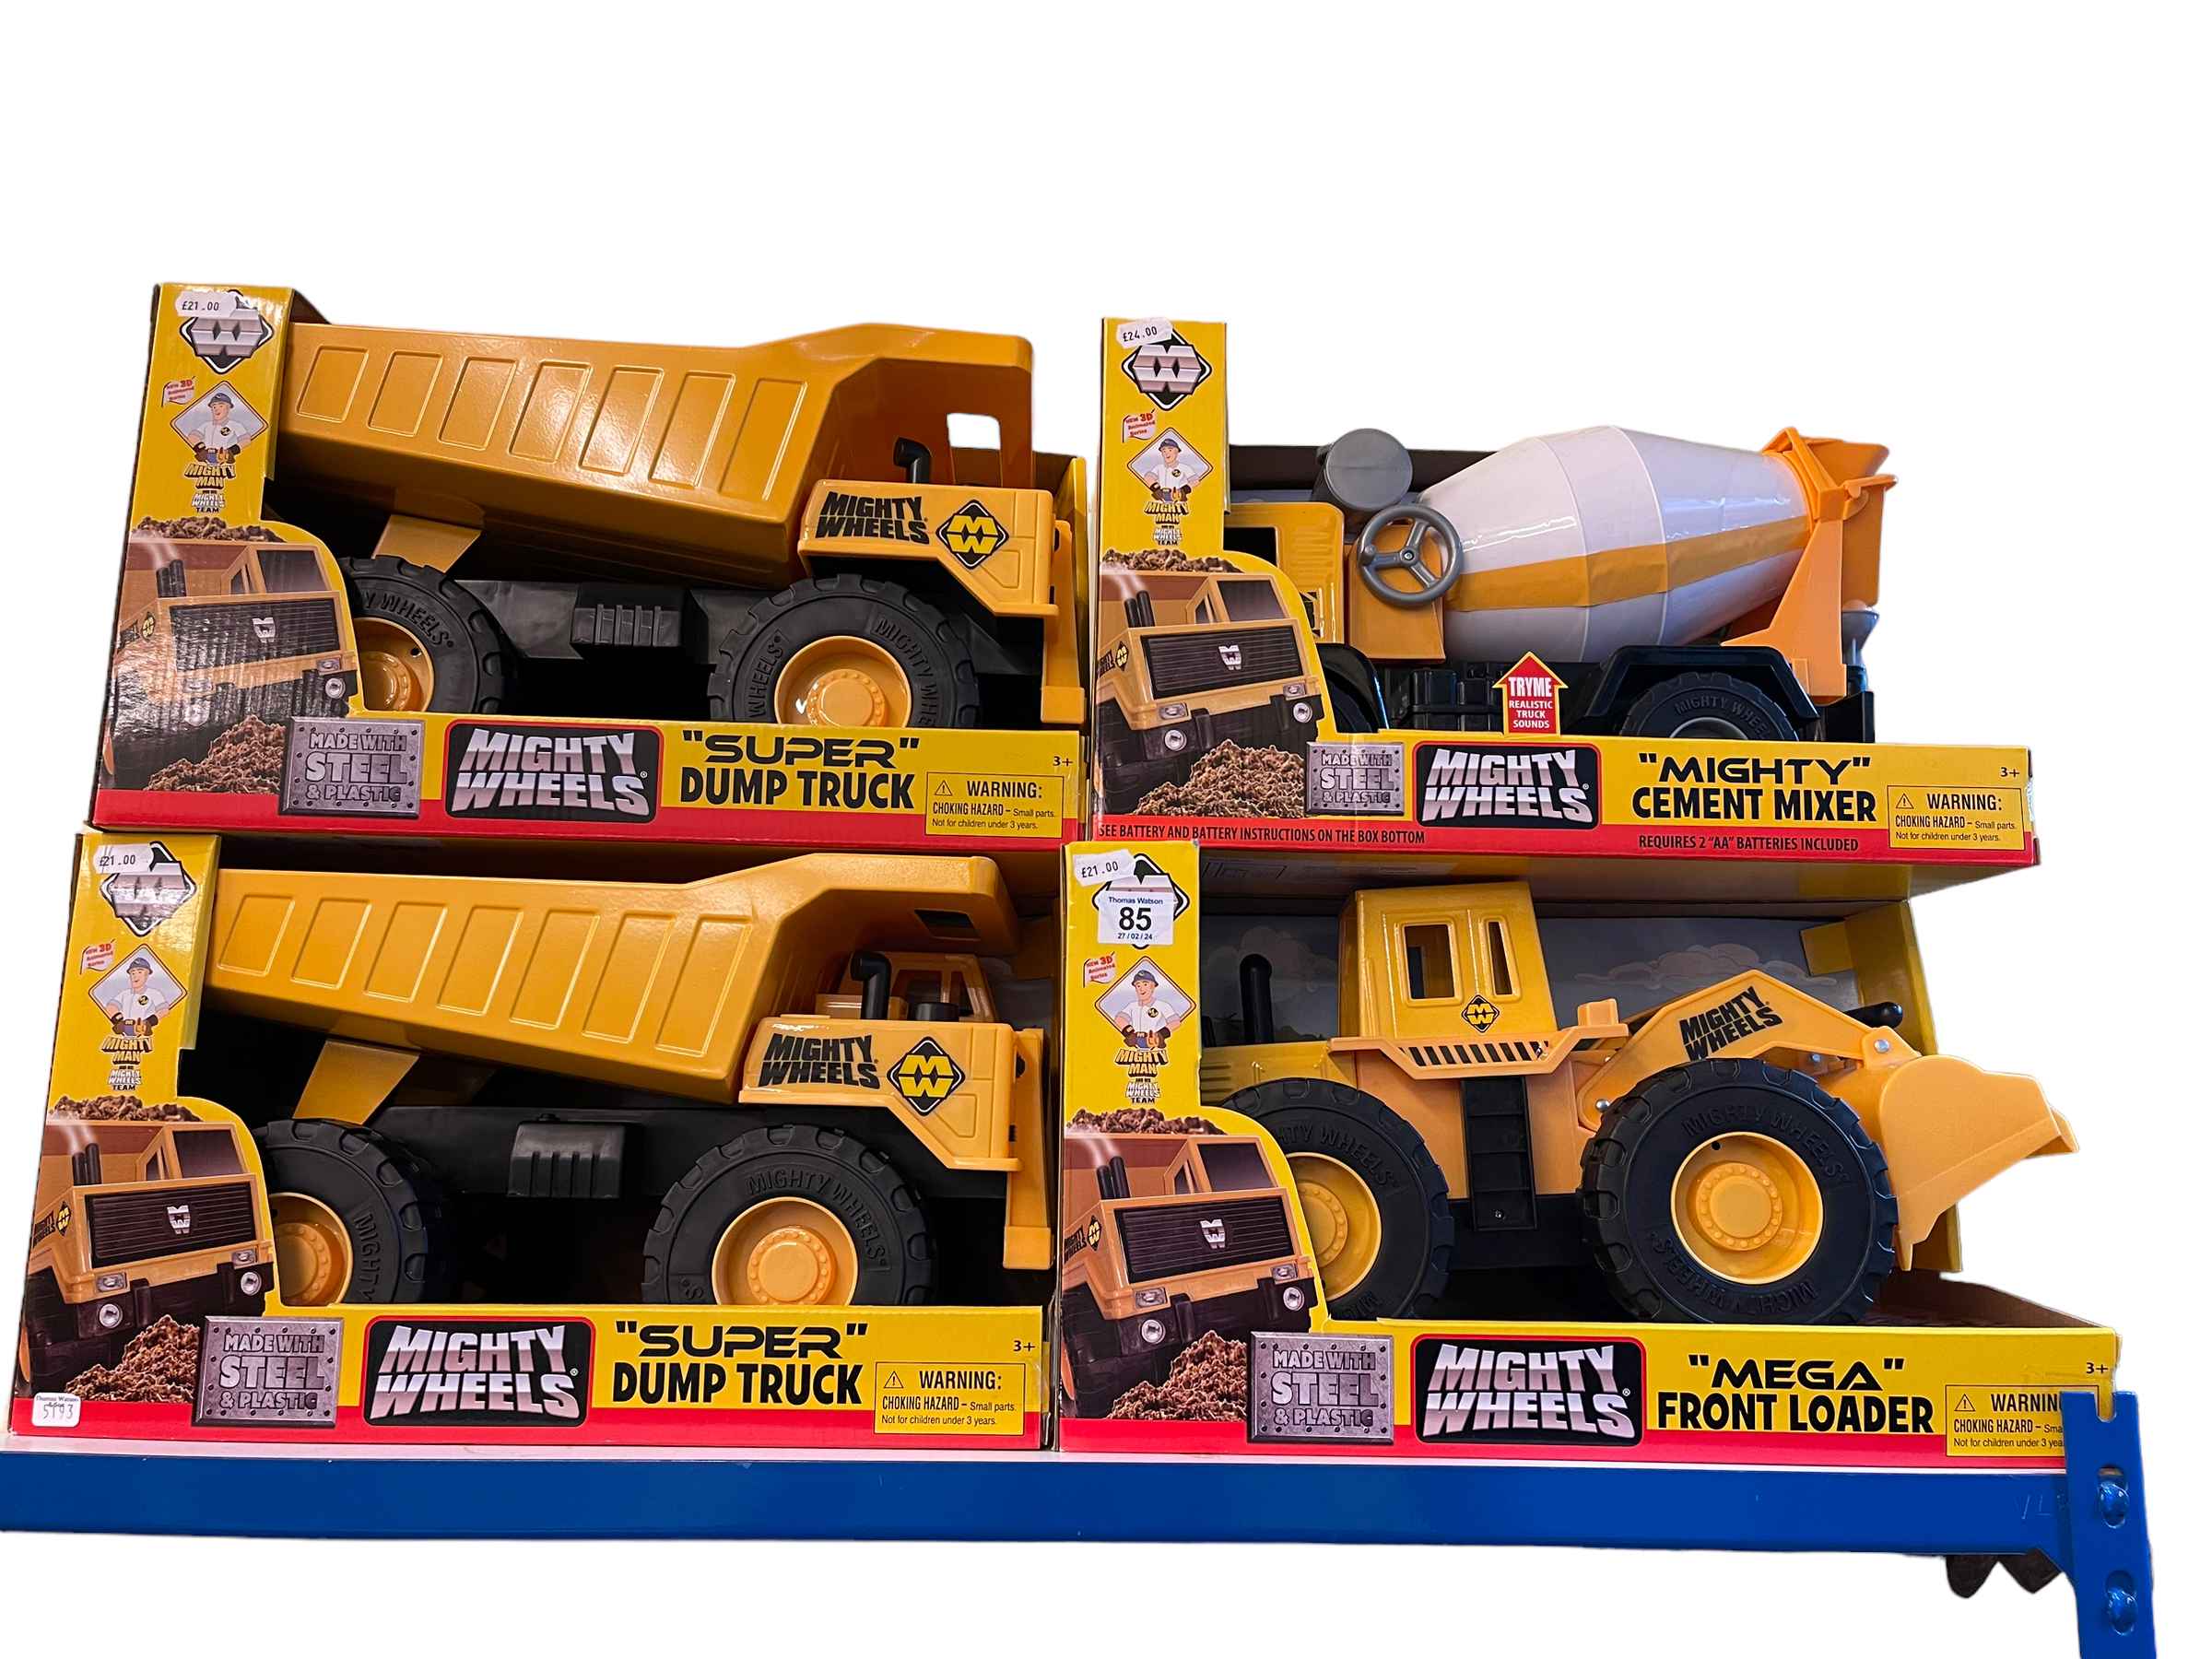 Four mighty wheels dump truck, cement mixer and front loader.